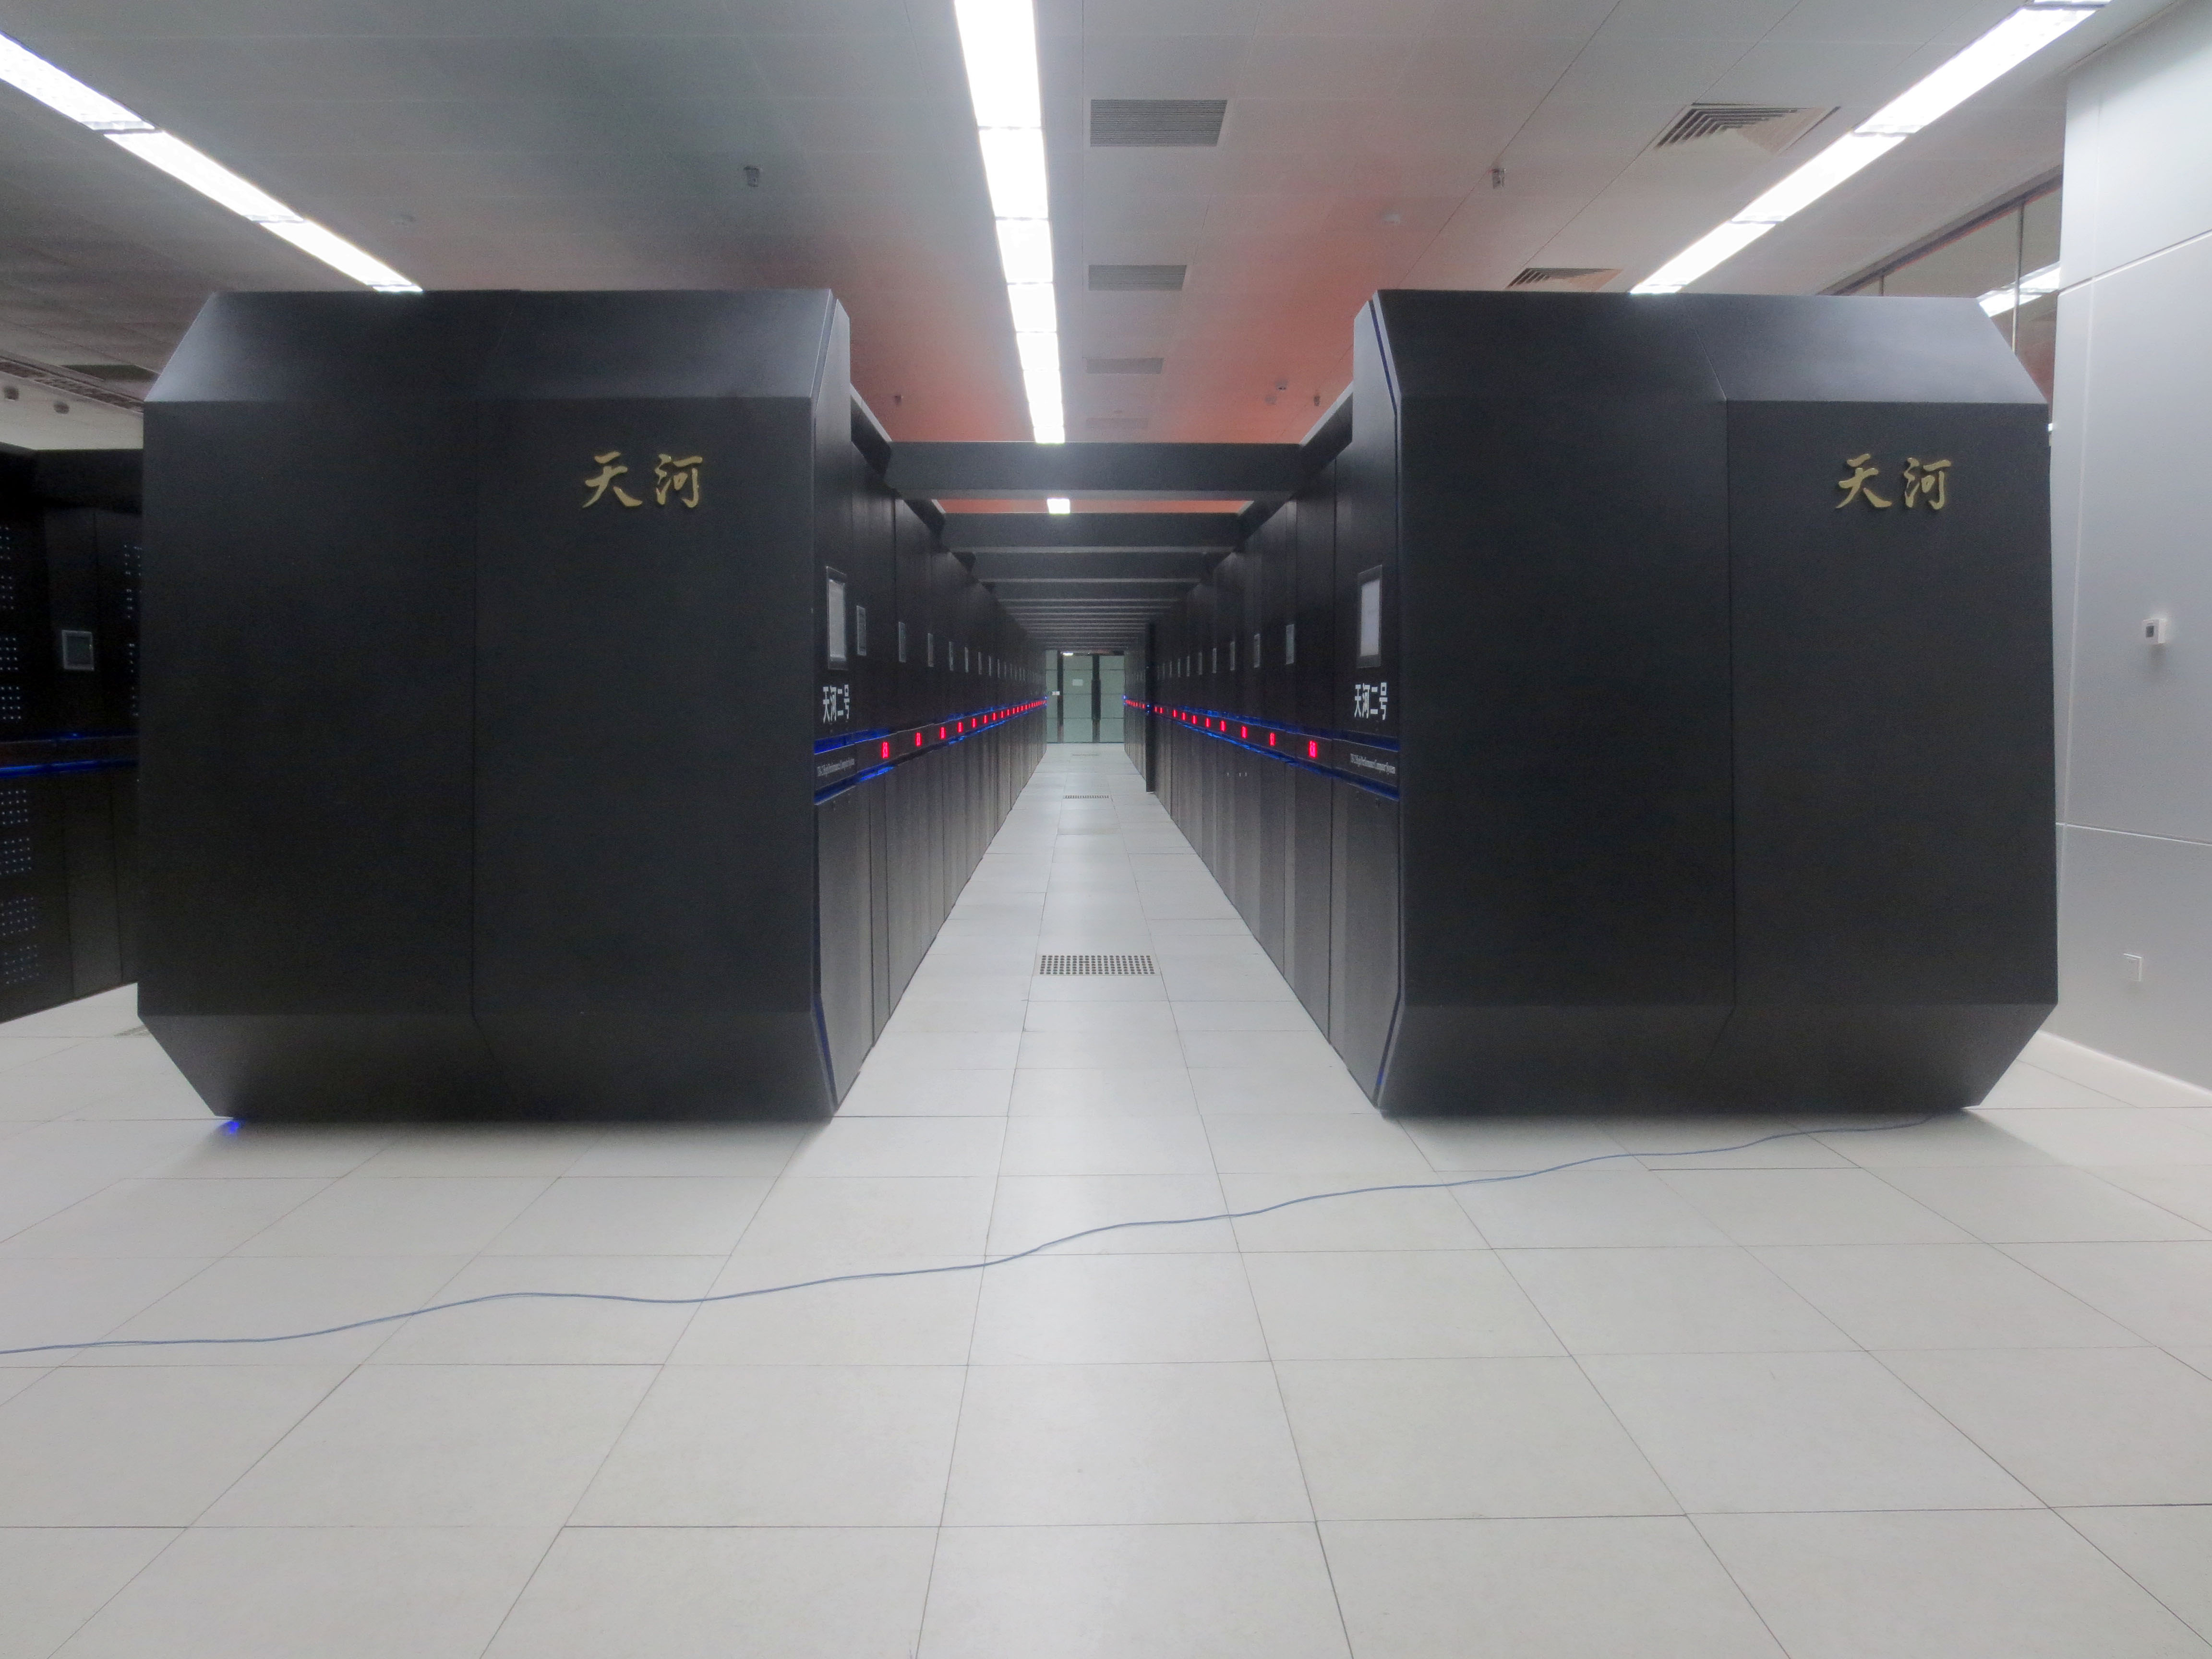 Tianhe-2, current title holder of worlds most powerful supercomputer